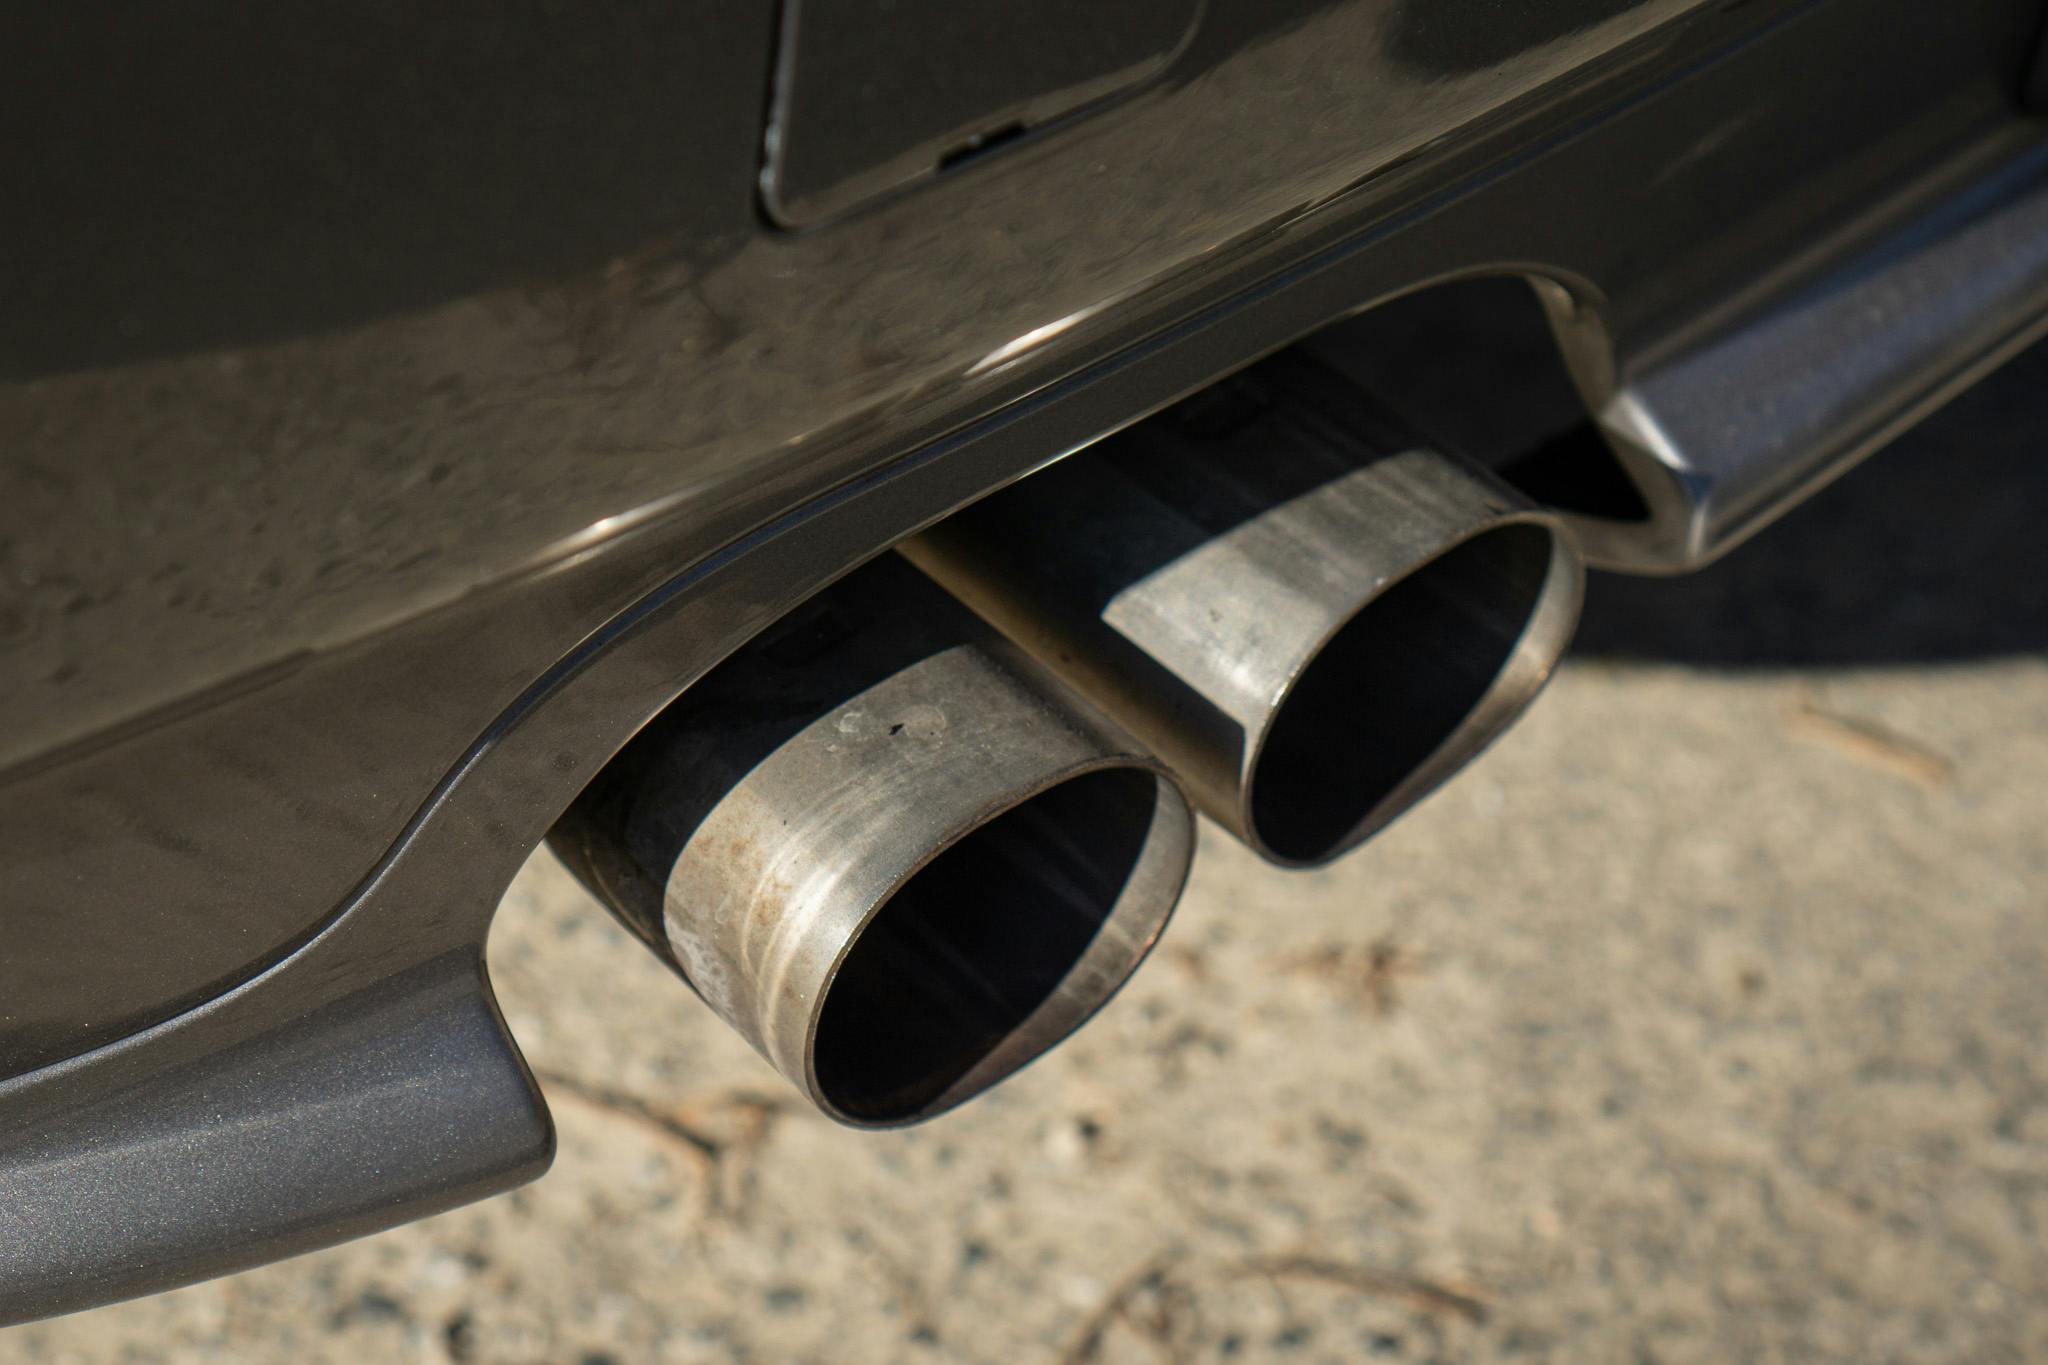 2001 BMW Z3 tailpipe exhaust tips